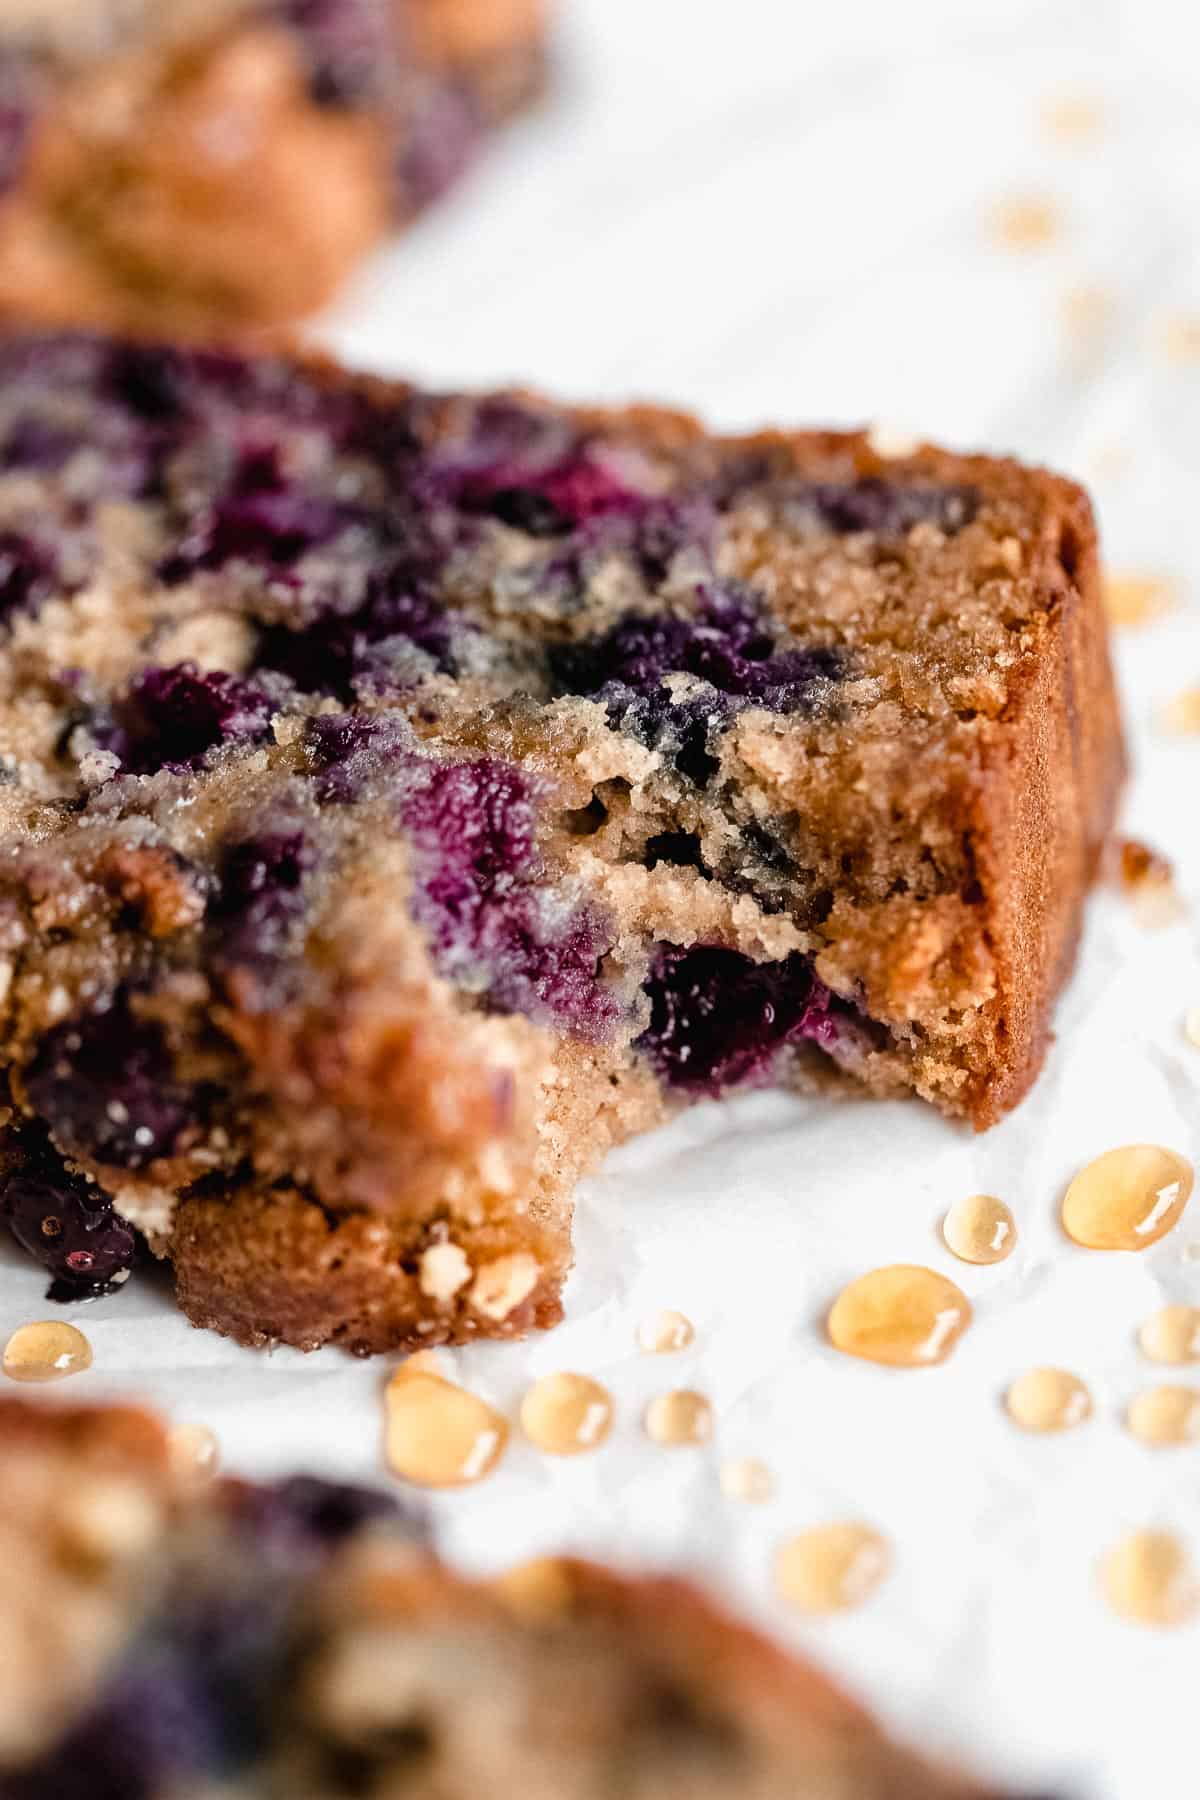 up close image of the blueberry banana bread with a bite taken out